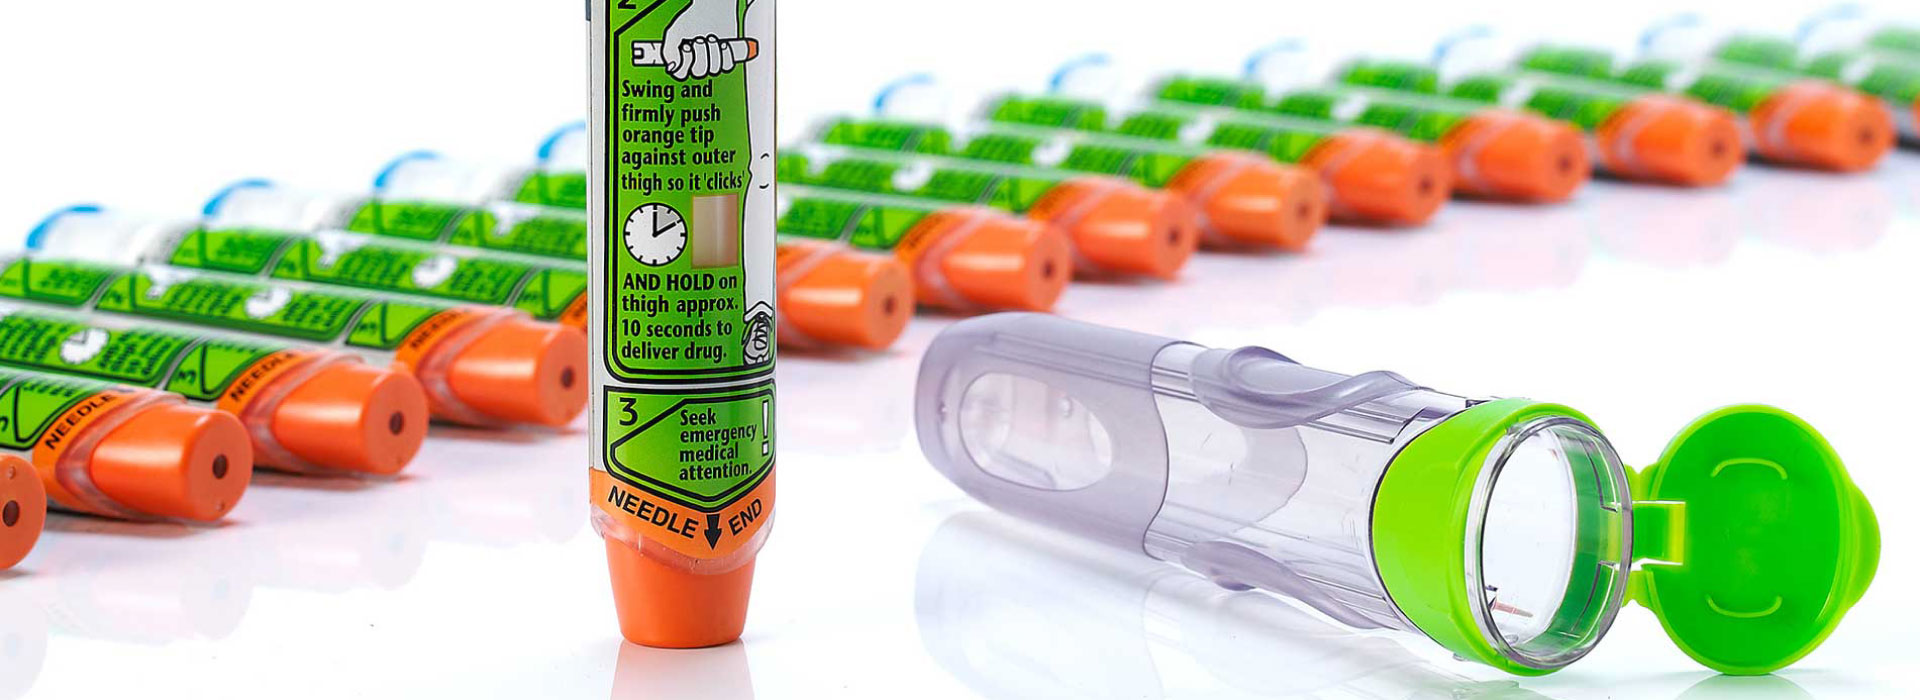 image-showing-a-series-of-epipen-lying-on-a-table